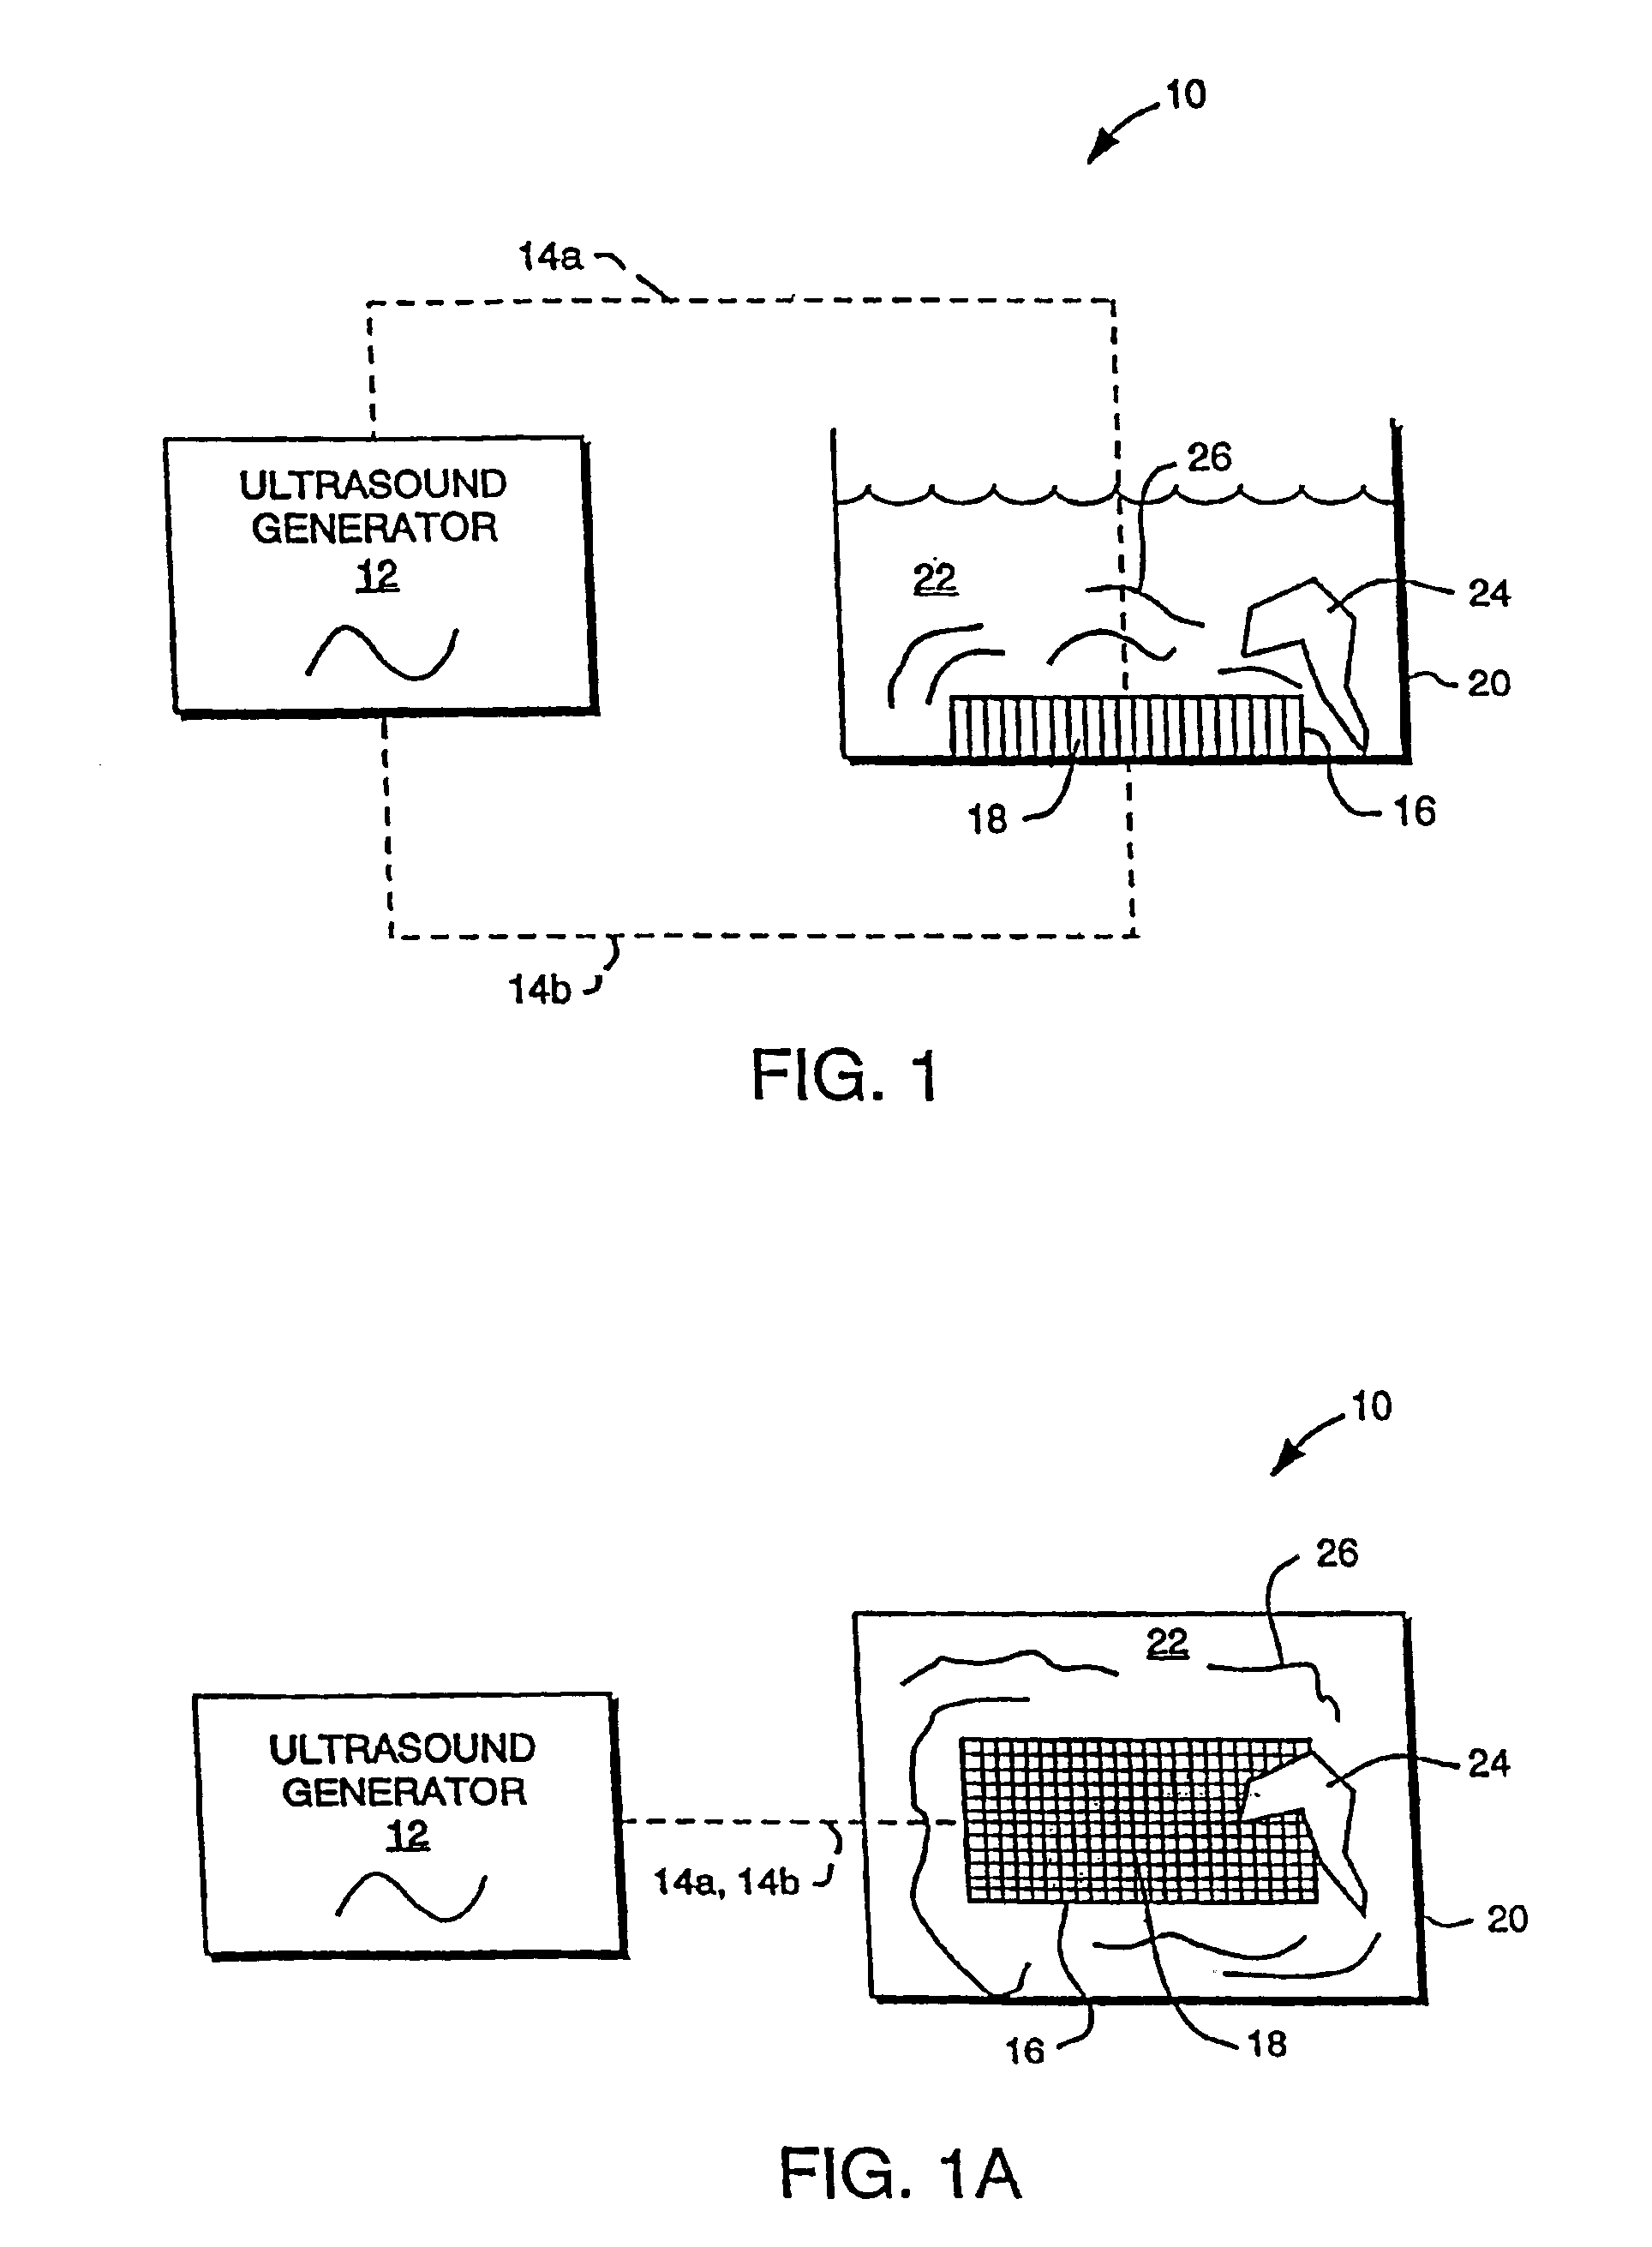 Apparatus and methods for cleaning and/or processing delicate parts